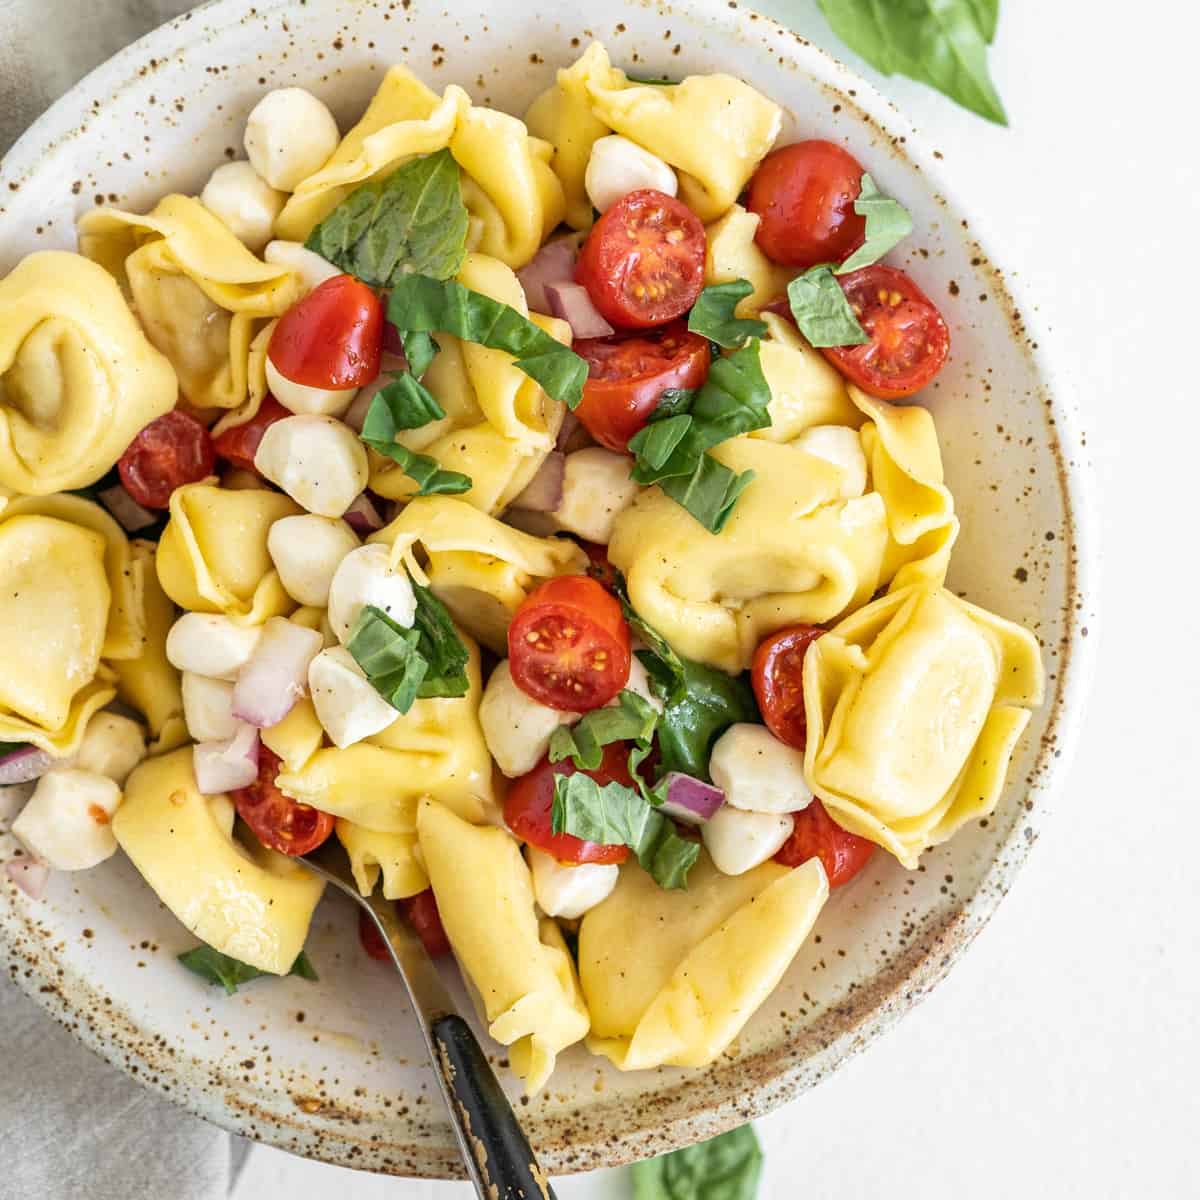 Easy Tortellini Pasta Salad That’s Just in Time for Summer